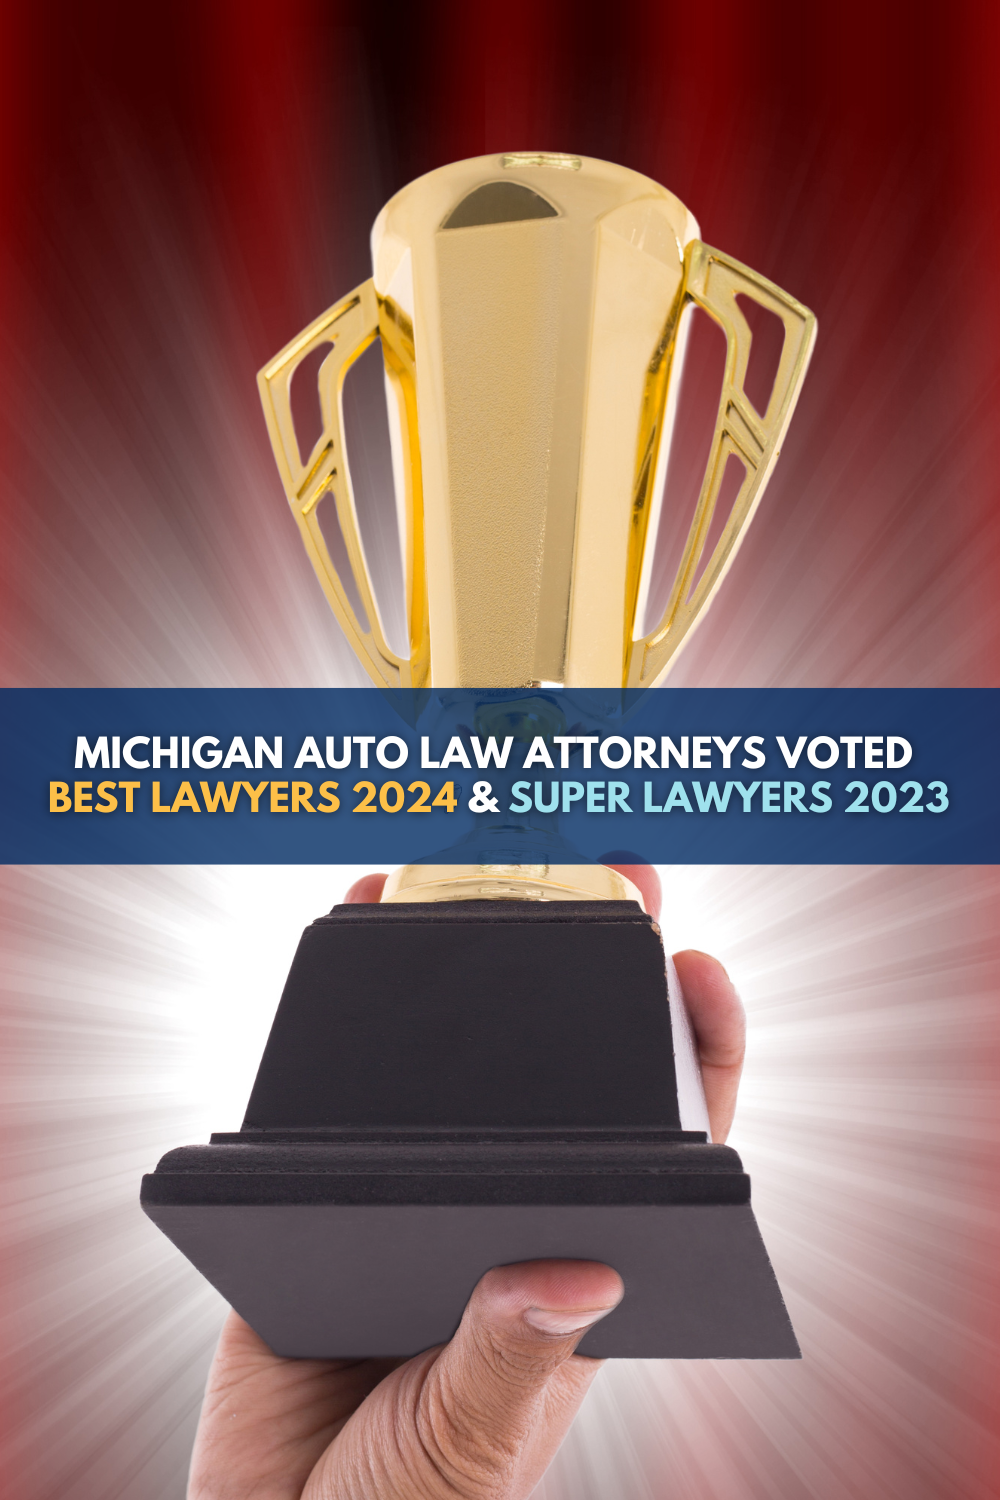 Michigan Auto Law attorneys voted Super Lawyers 2023 and Best Lawyers in America 2024